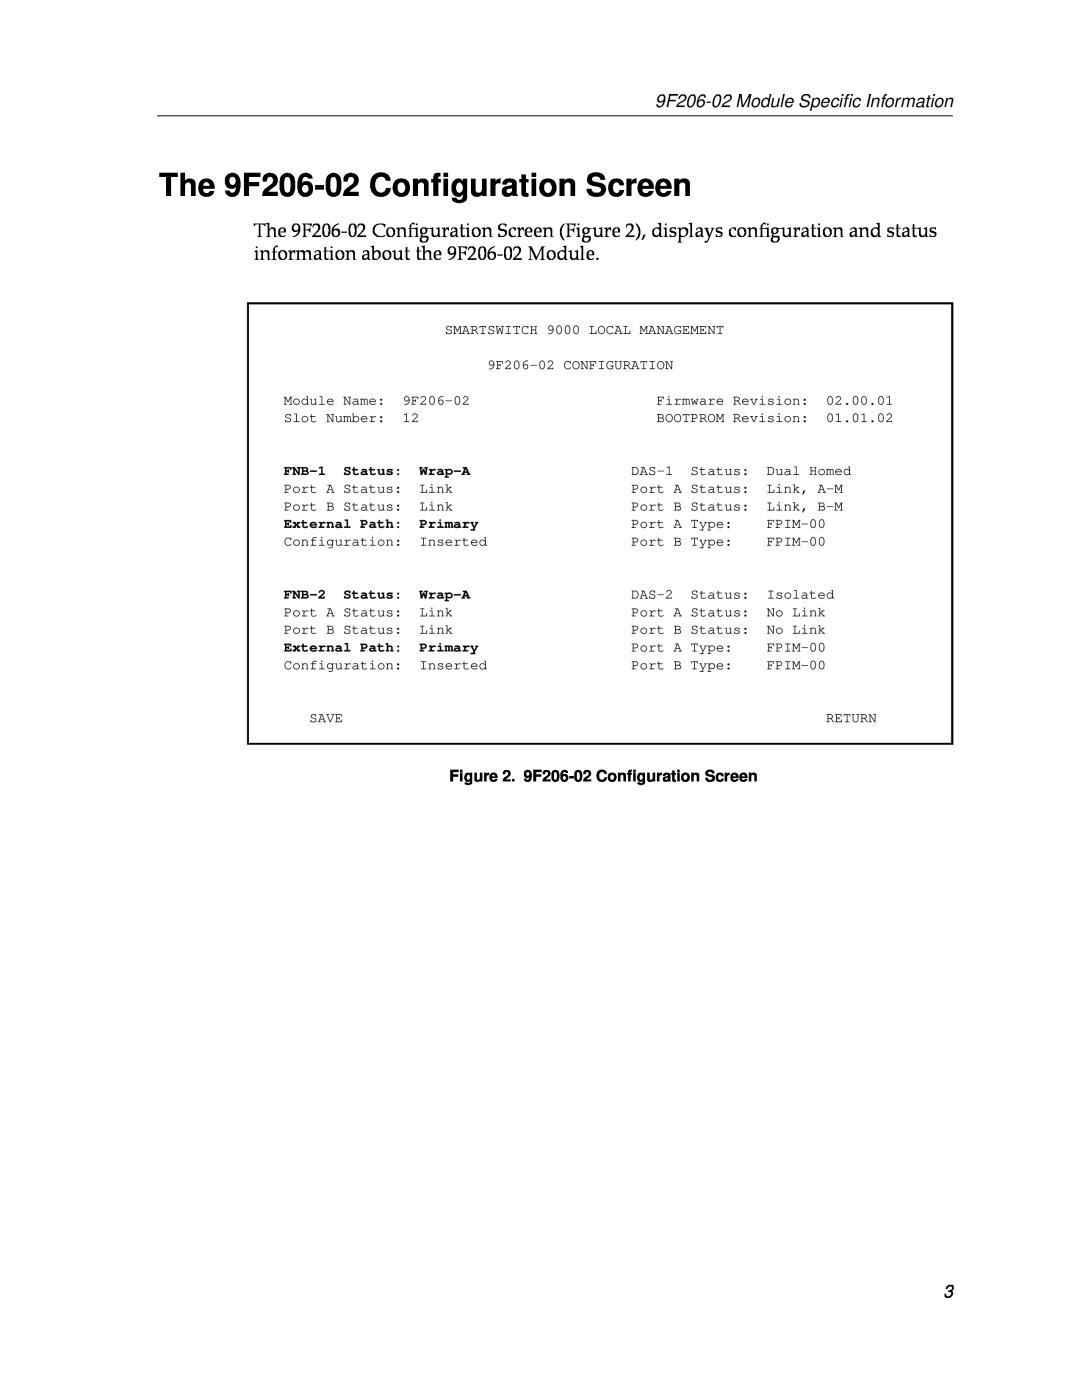 Cabletron Systems The 9F206-02 Conﬁguration Screen, 9F206-02 Module Speciﬁc Information, FNB-1, Wrap-A, Primary, FNB-2 